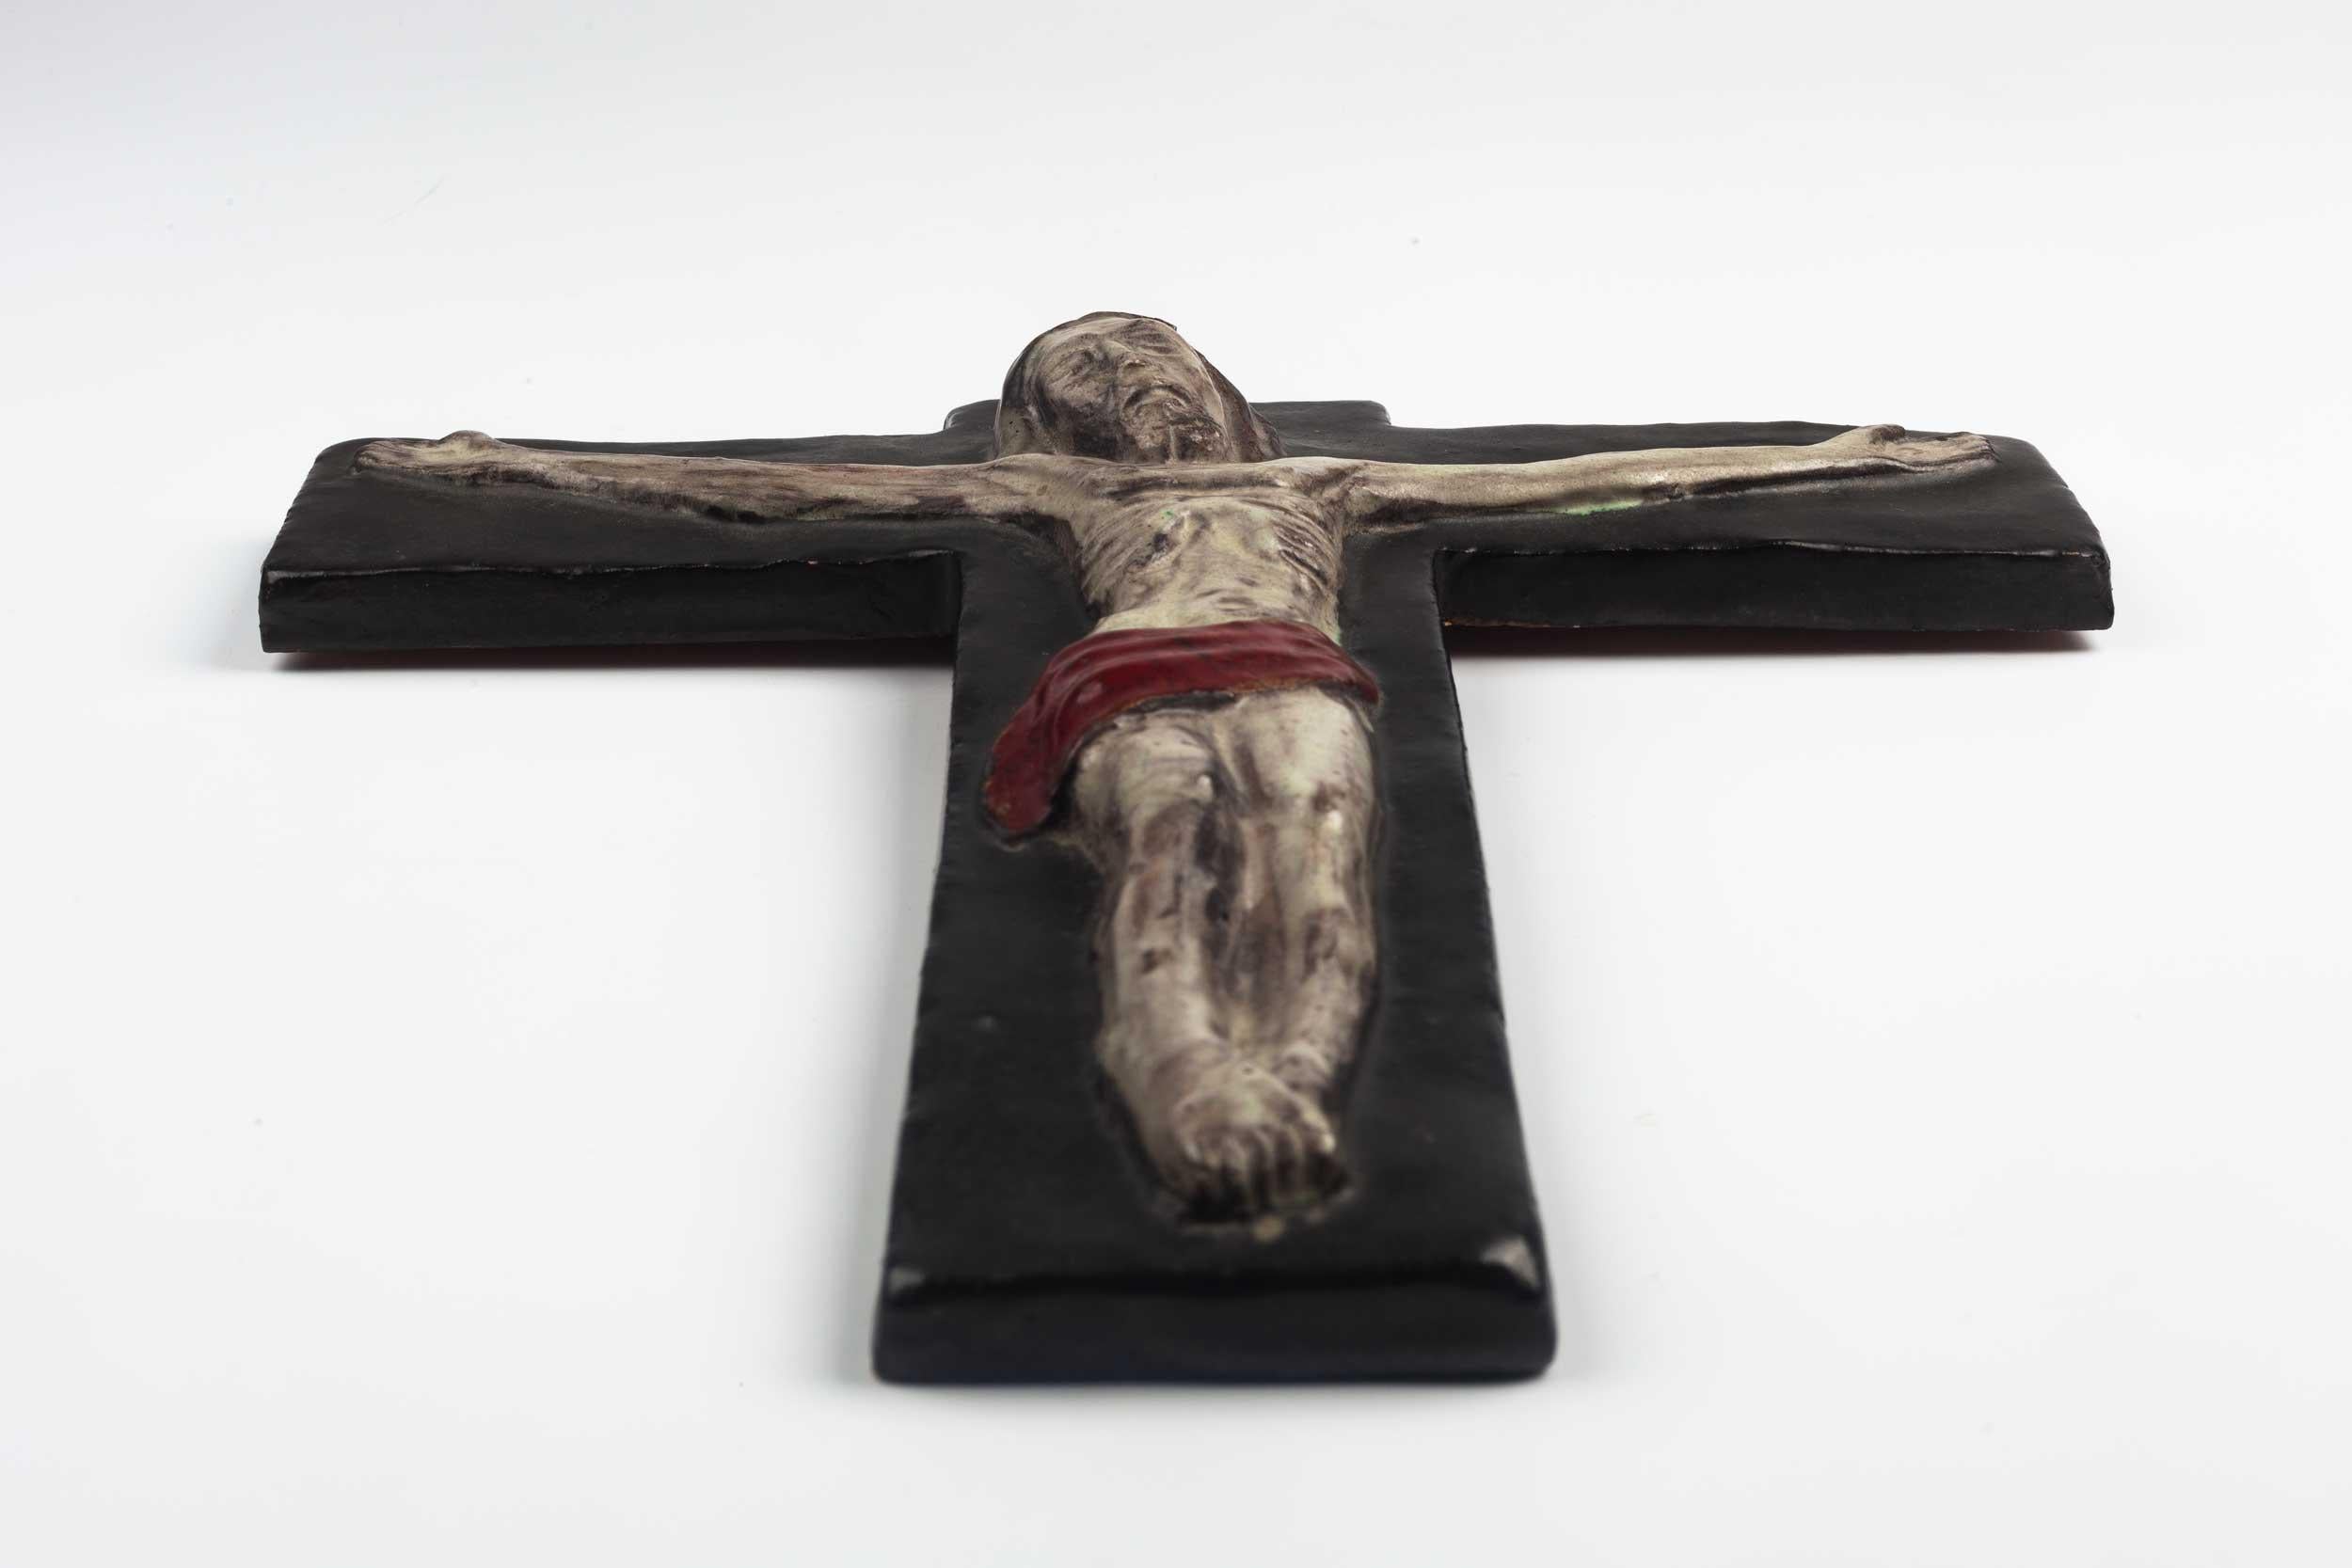 Midcentury European wall crucifix depicting Christ on the cross. From a large collection of vintage crosses handmade by Flemish artisans. 

From modernism to brutalism, the crosses in our collection range from being as futurist as a modernist